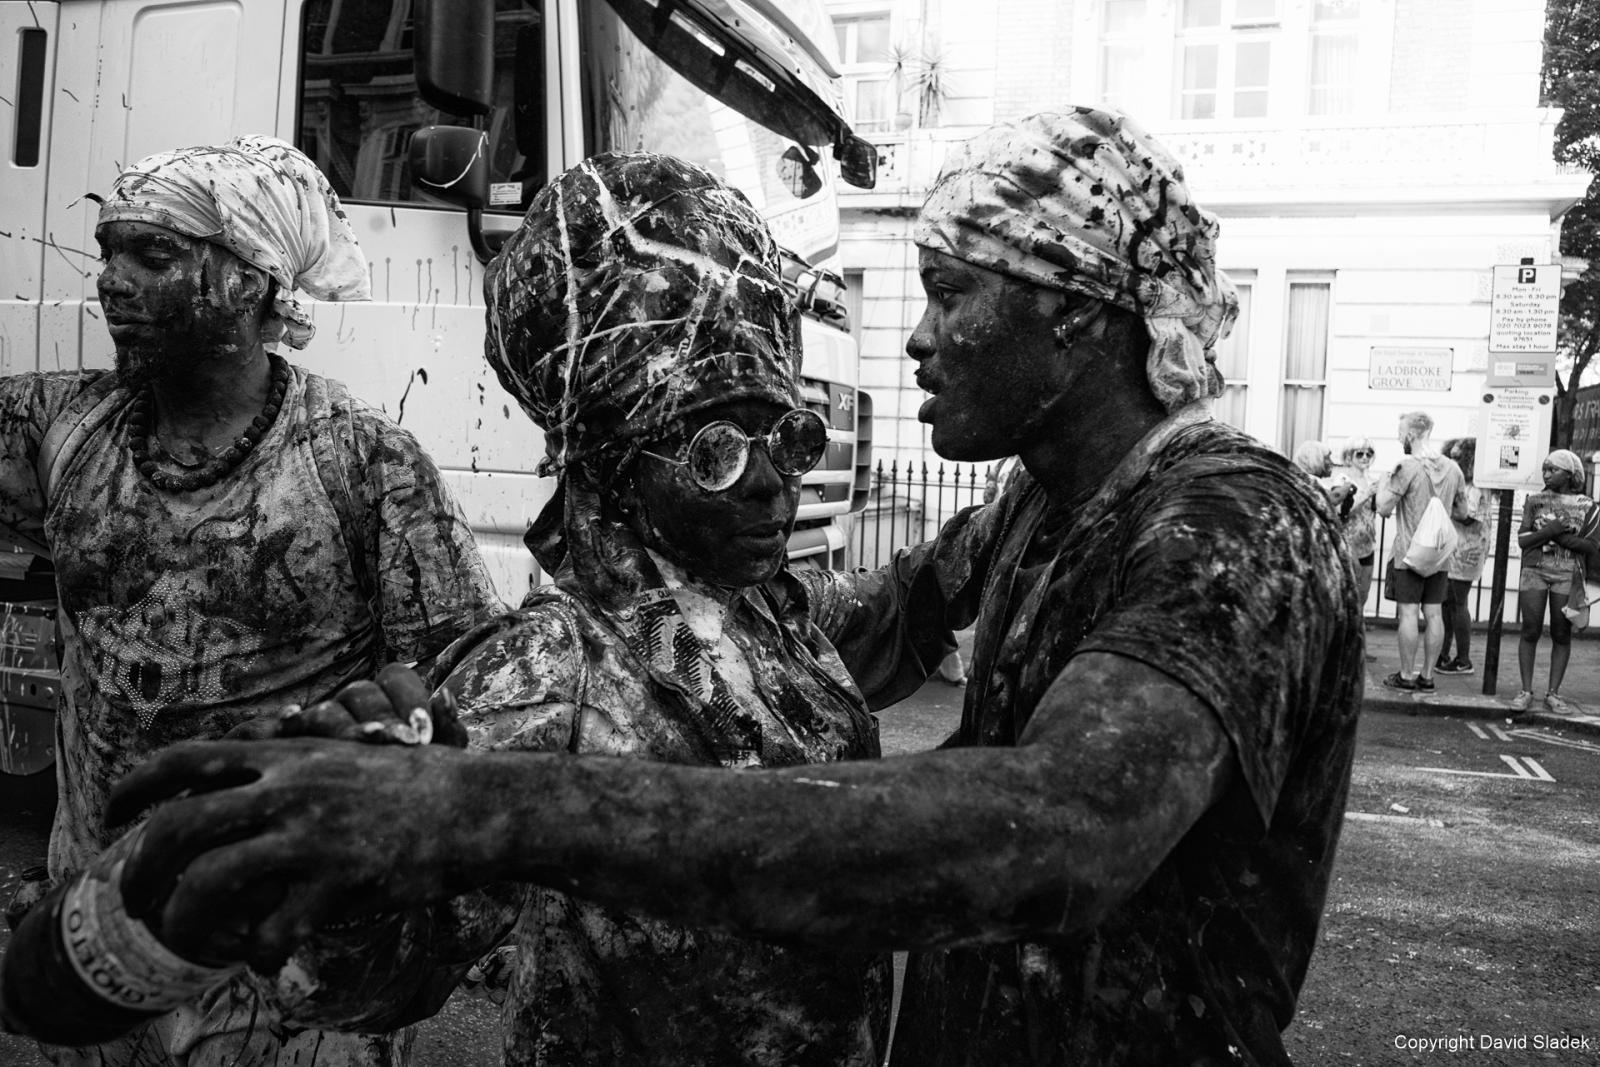 Notting Hill Carnival - before, and hopefully after the age of social distancing